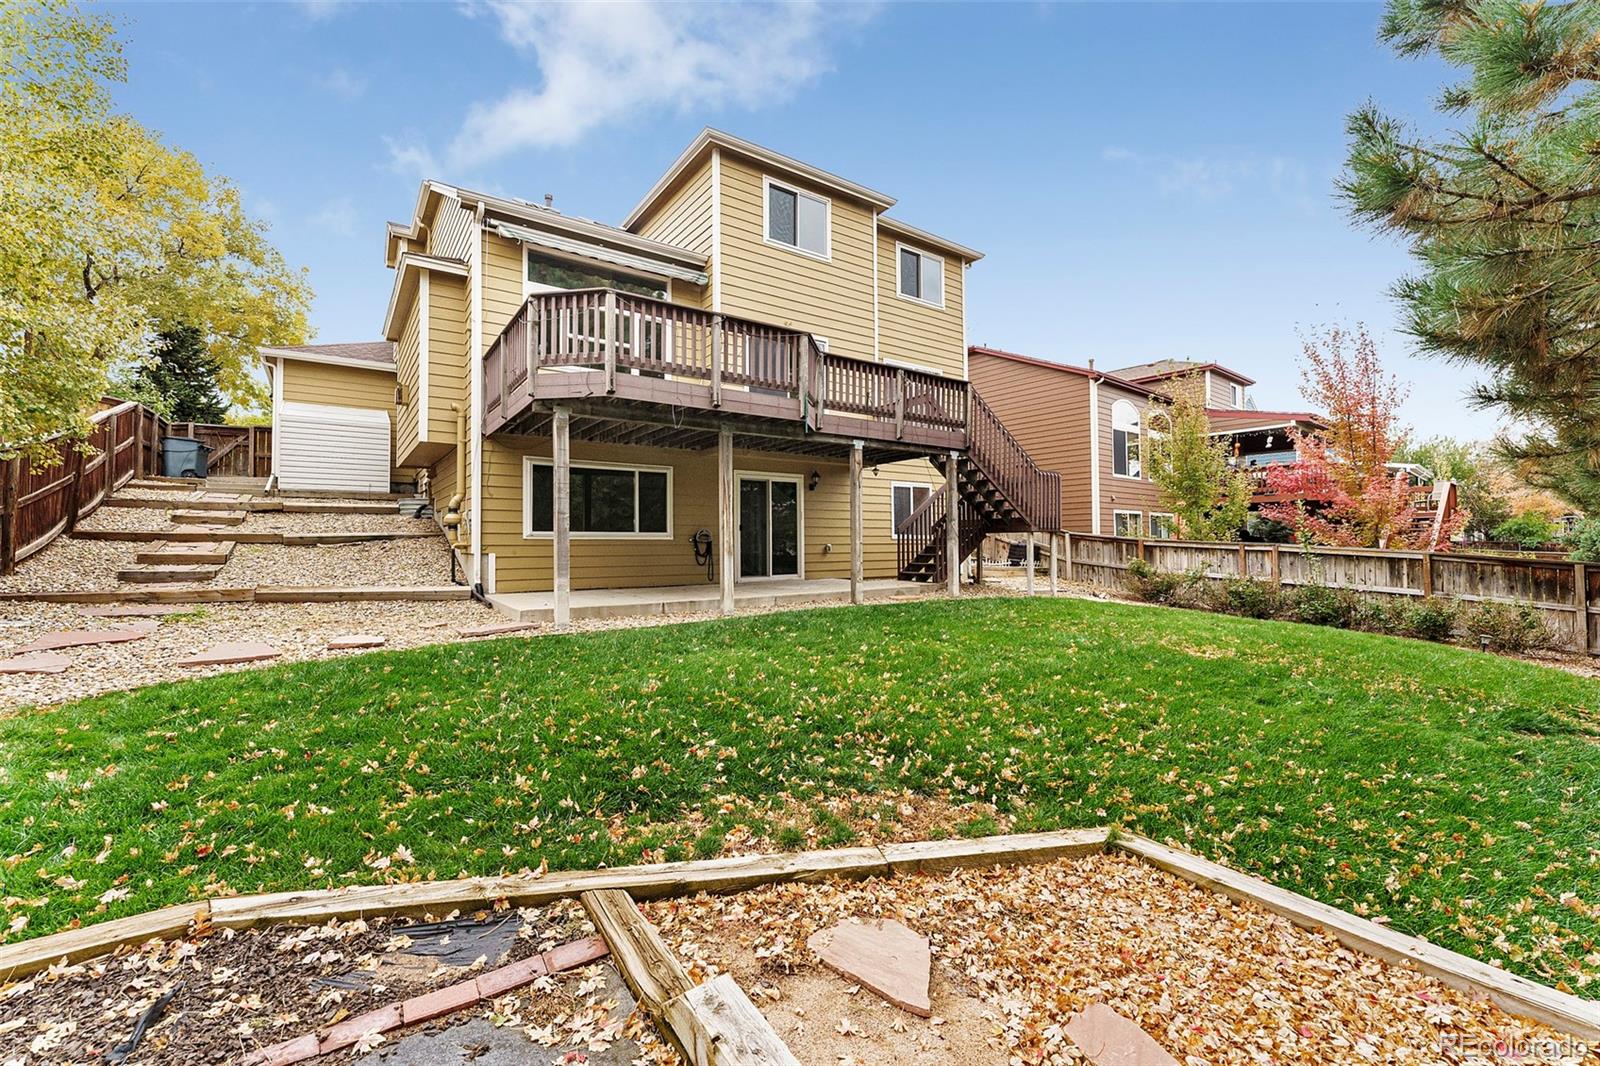 10084 Silver Maple, Highlands Ranch, CO